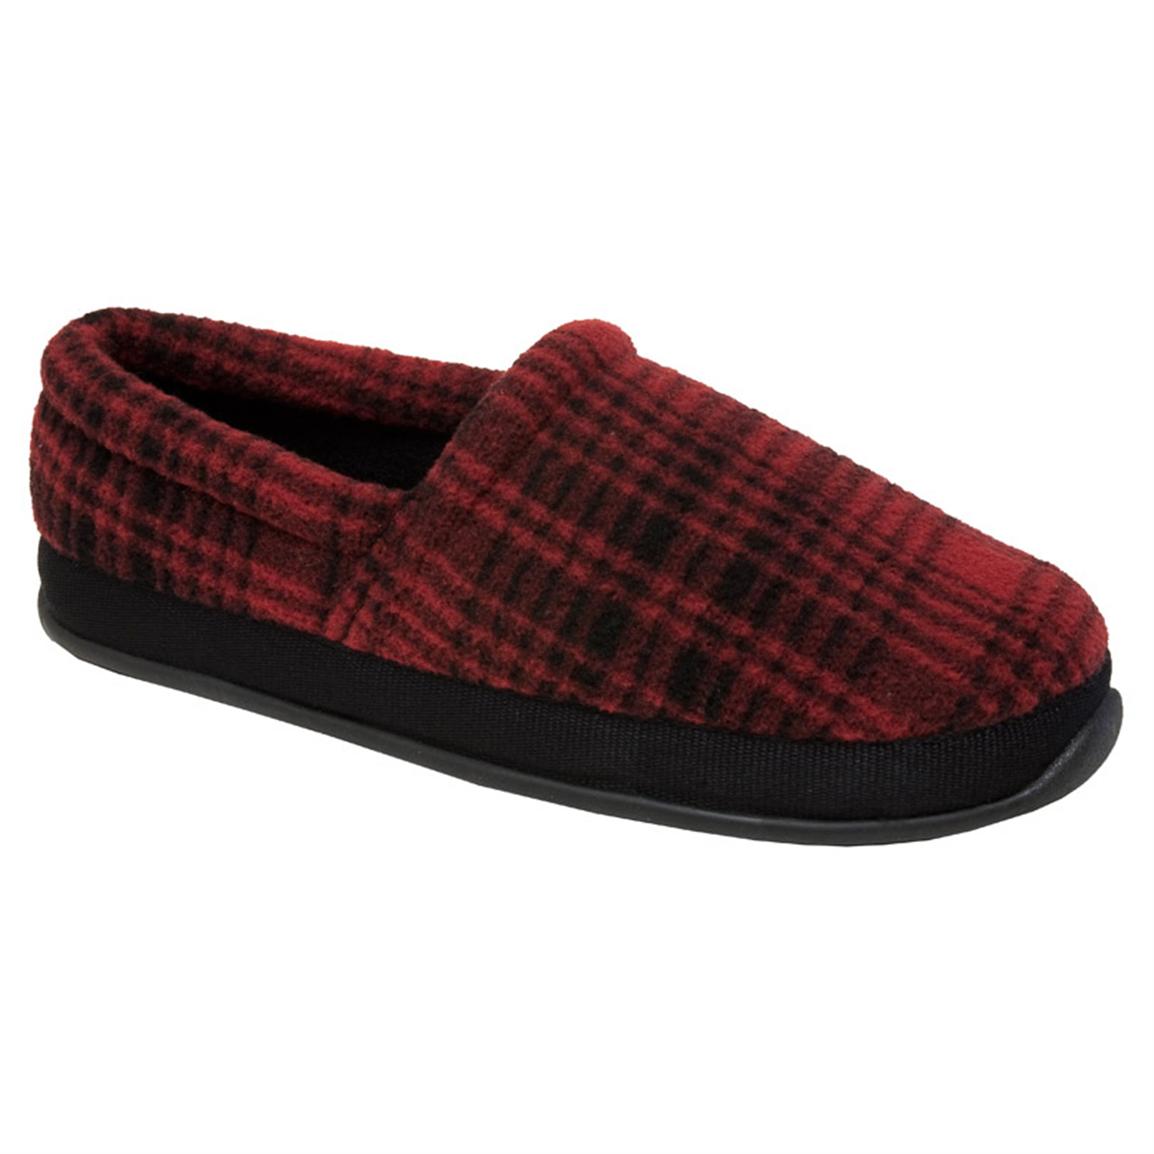 Men's Woolrich® Parkwood Slippers - 191297, Slippers at Sportsman's Guide